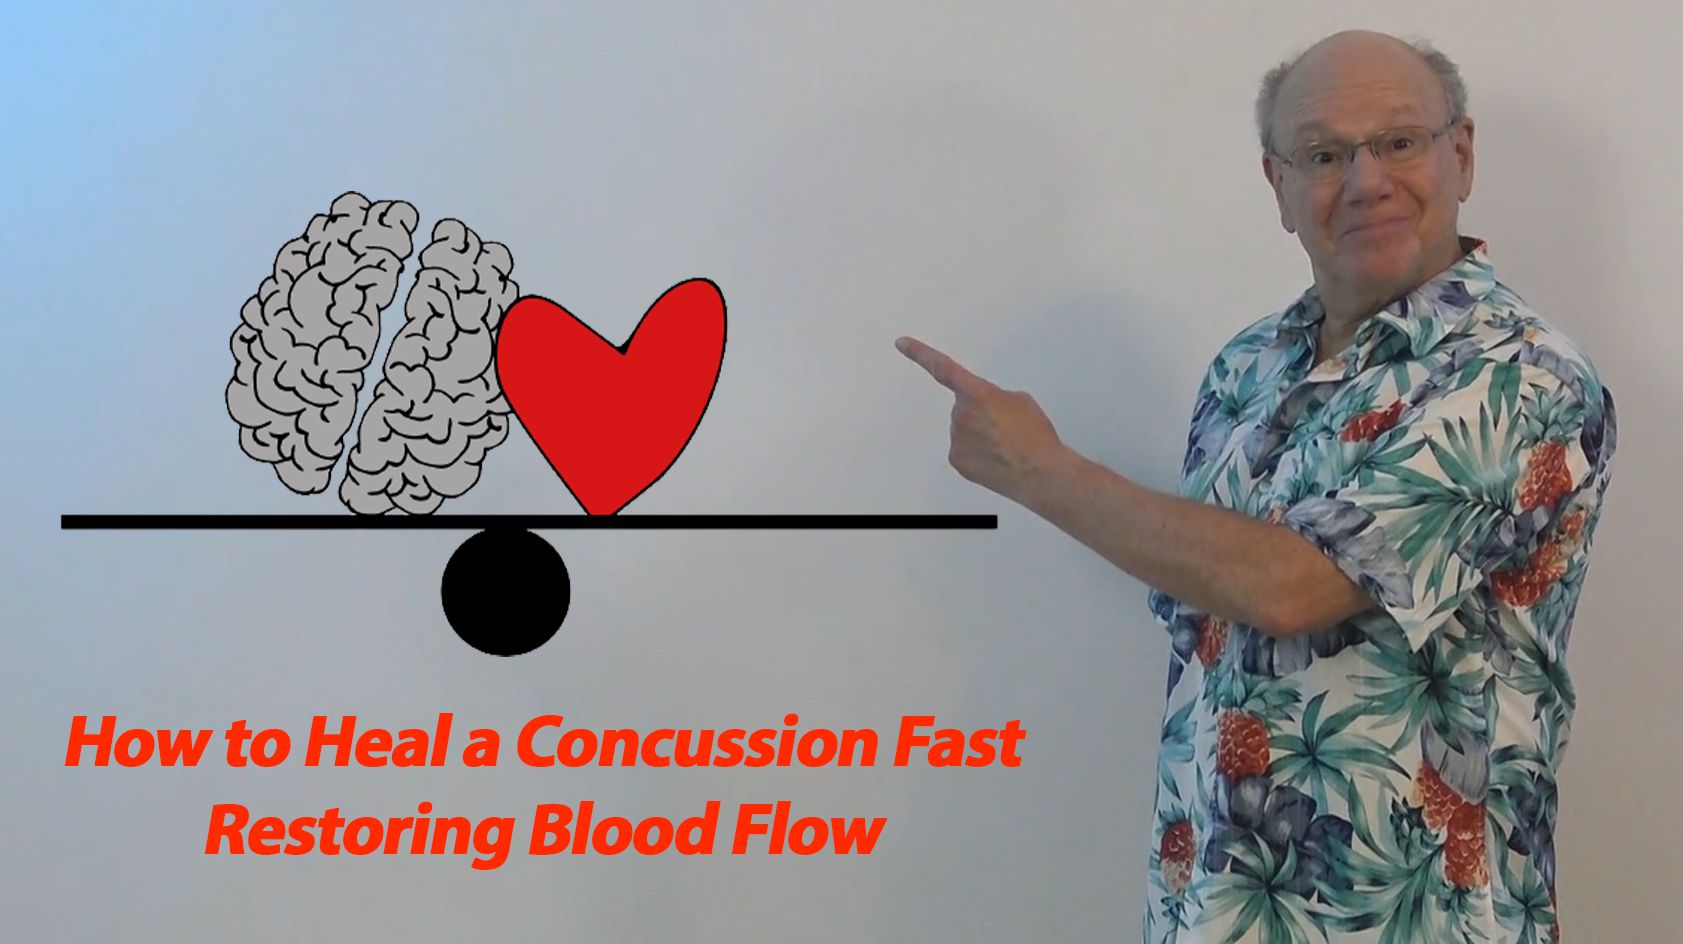 How to Heal a Concussion Fast